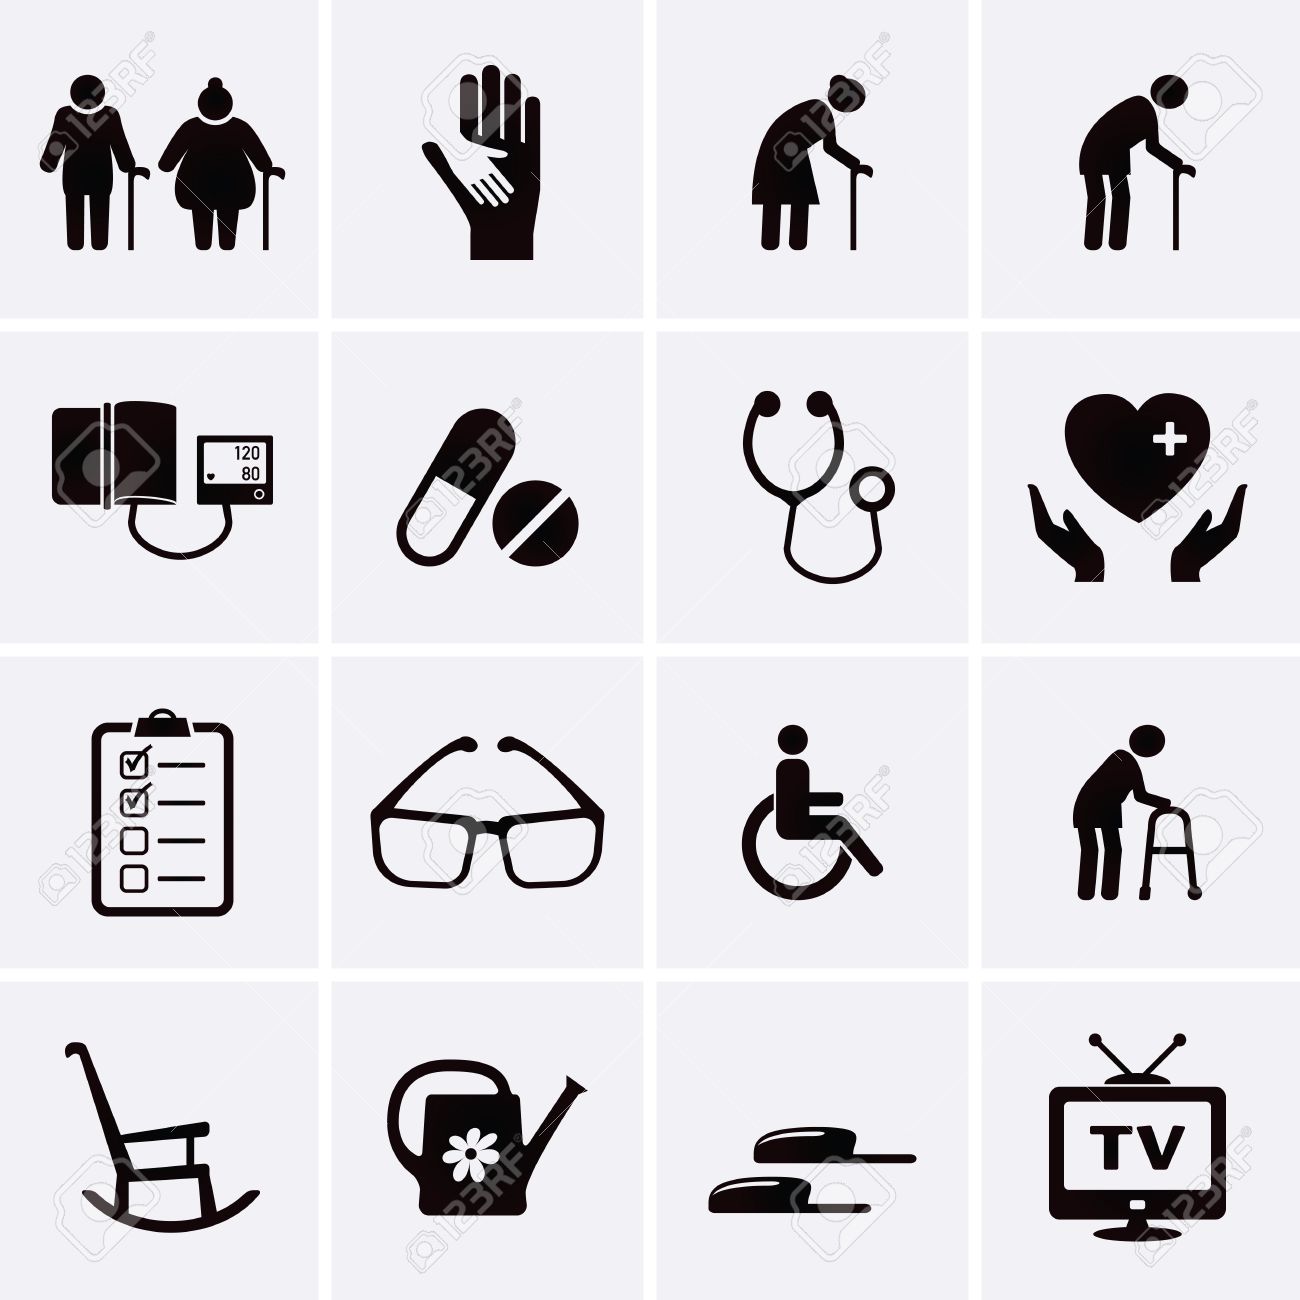 Old man, pensioner silhouette icon ~ Icons ~ Creative Market